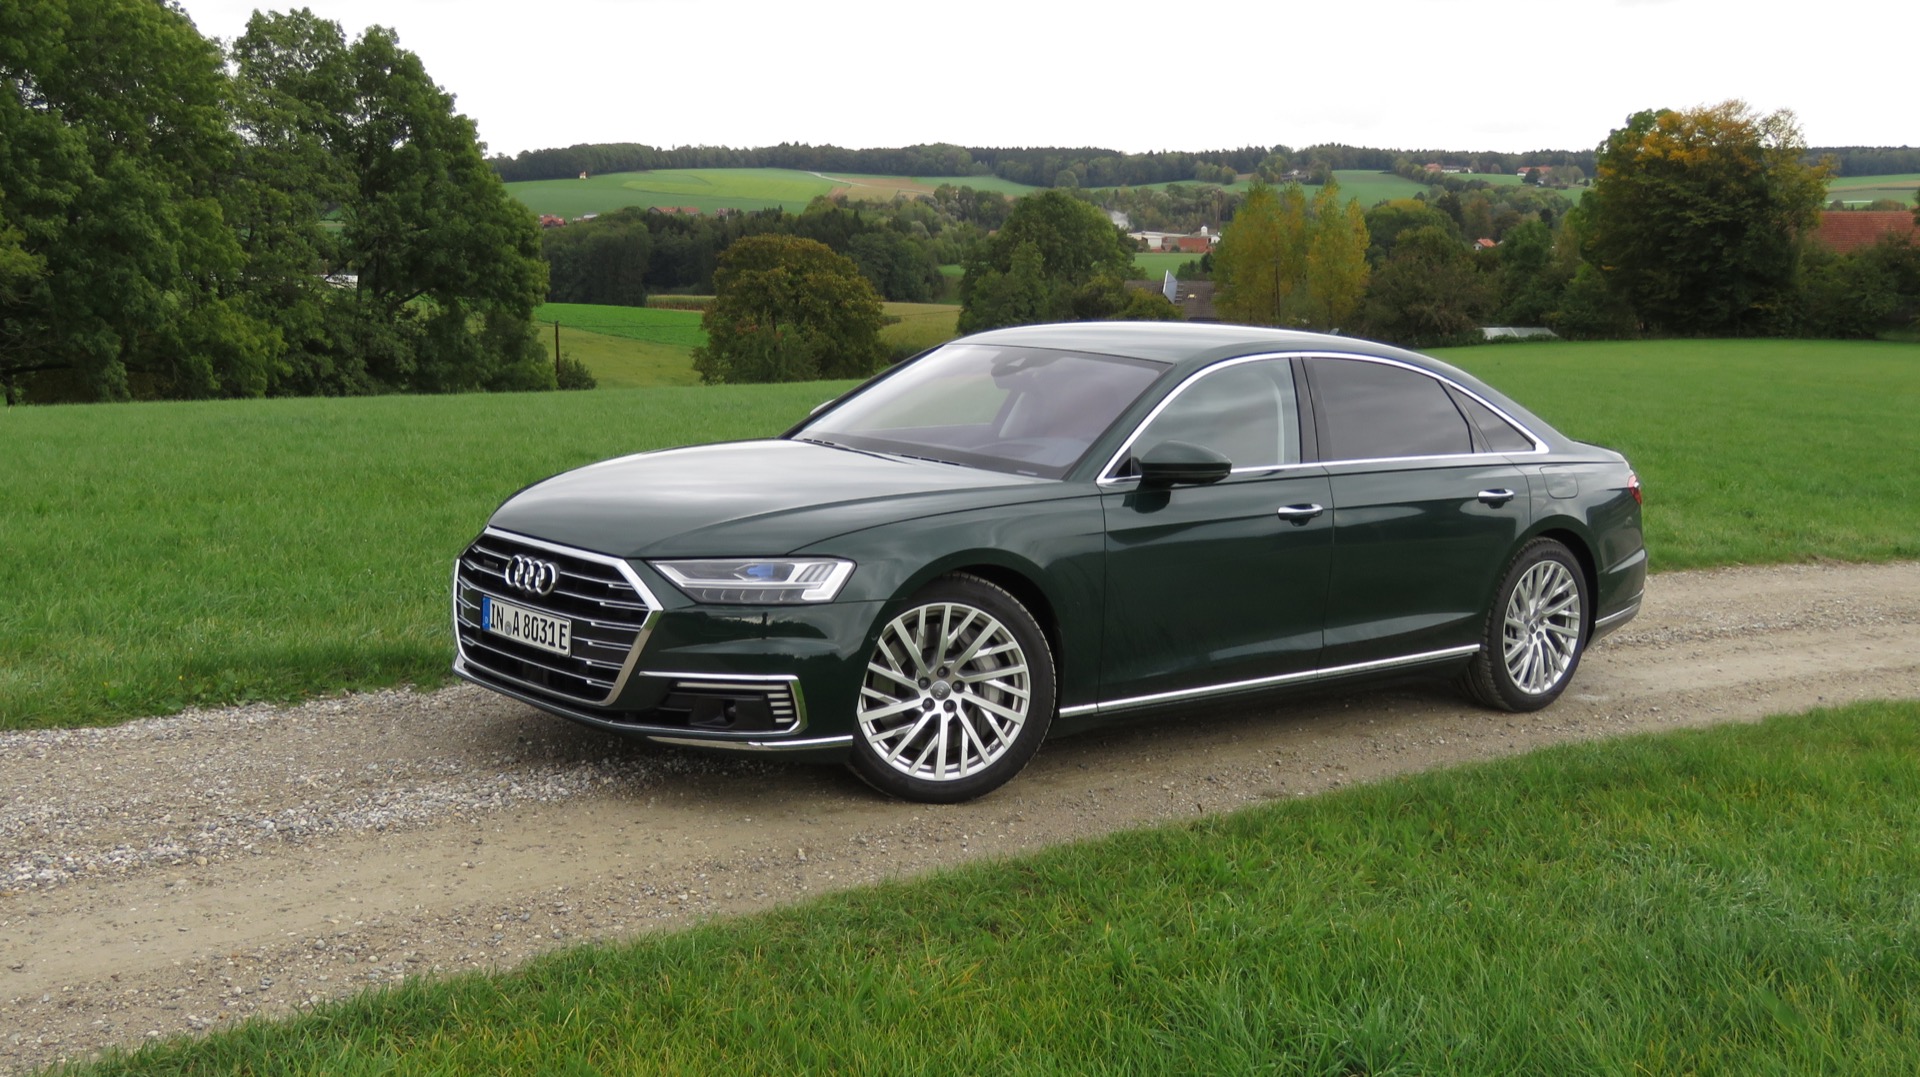 First drive review: 2020 Audi A8 plug-in hybrid reflects new priorities